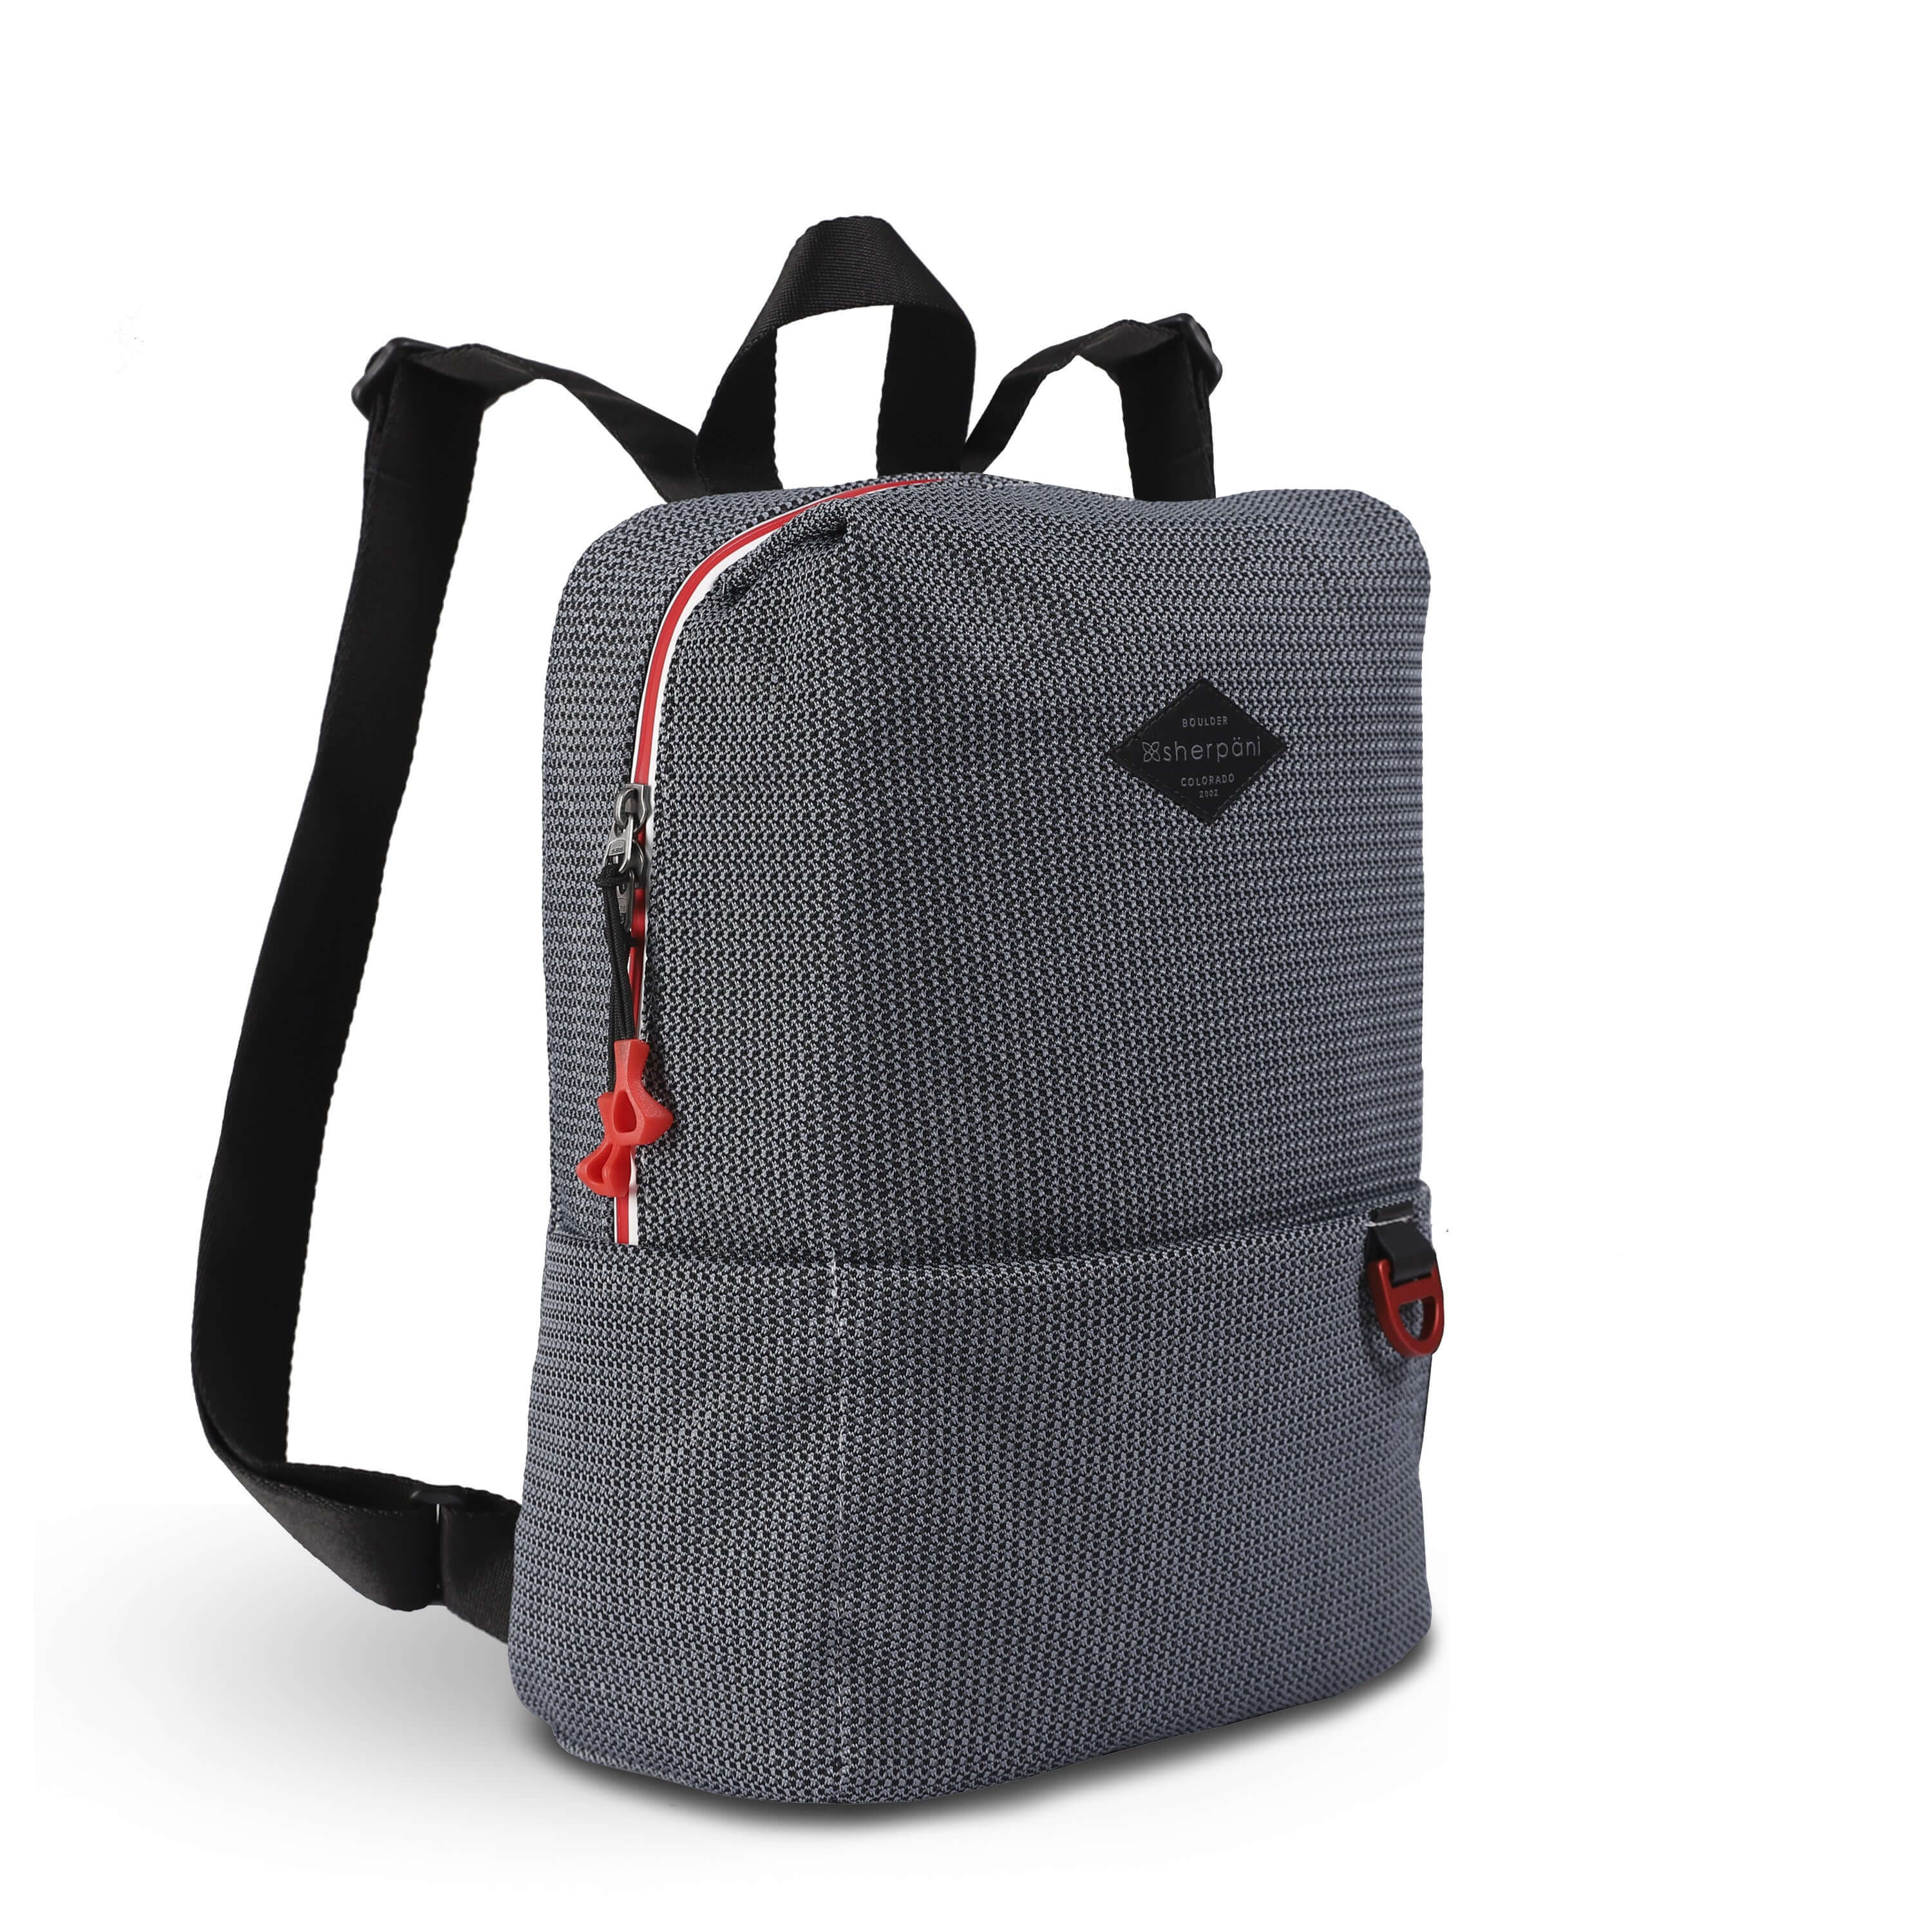 Angled front view of Sherpani mesh backpack, the Adaline. It has a gray and black mesh pattern and features red pops of color on the accent buckle and easy-pull zipper. The bag has black adjustable backpack straps and a tote handle for easy carrying.